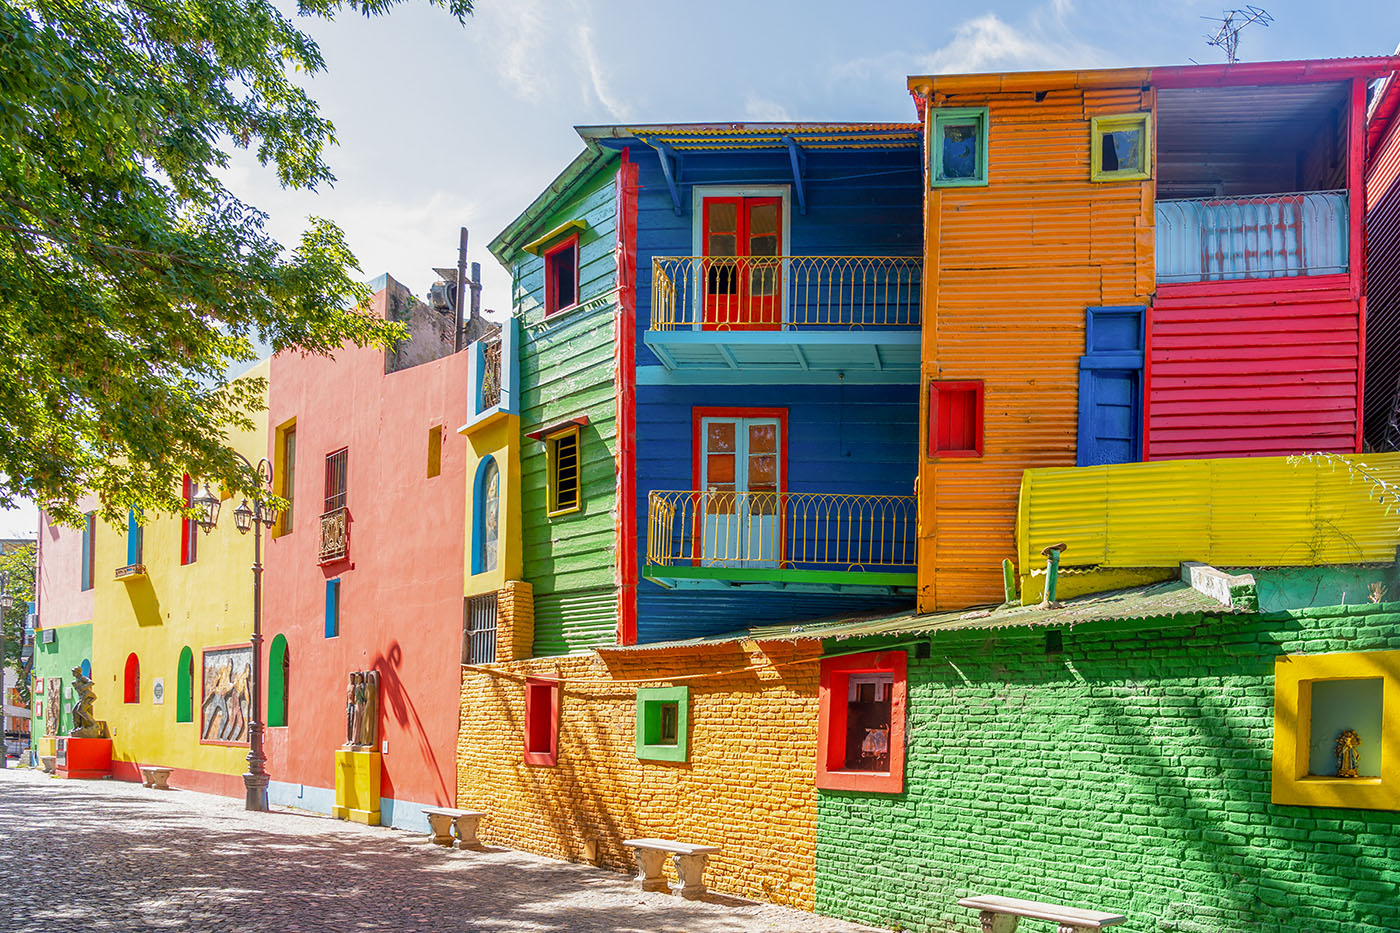 Start your adventure in La Boca, a vibrant neighborhood pulsating with colorful streets and the captivating beat of tango.